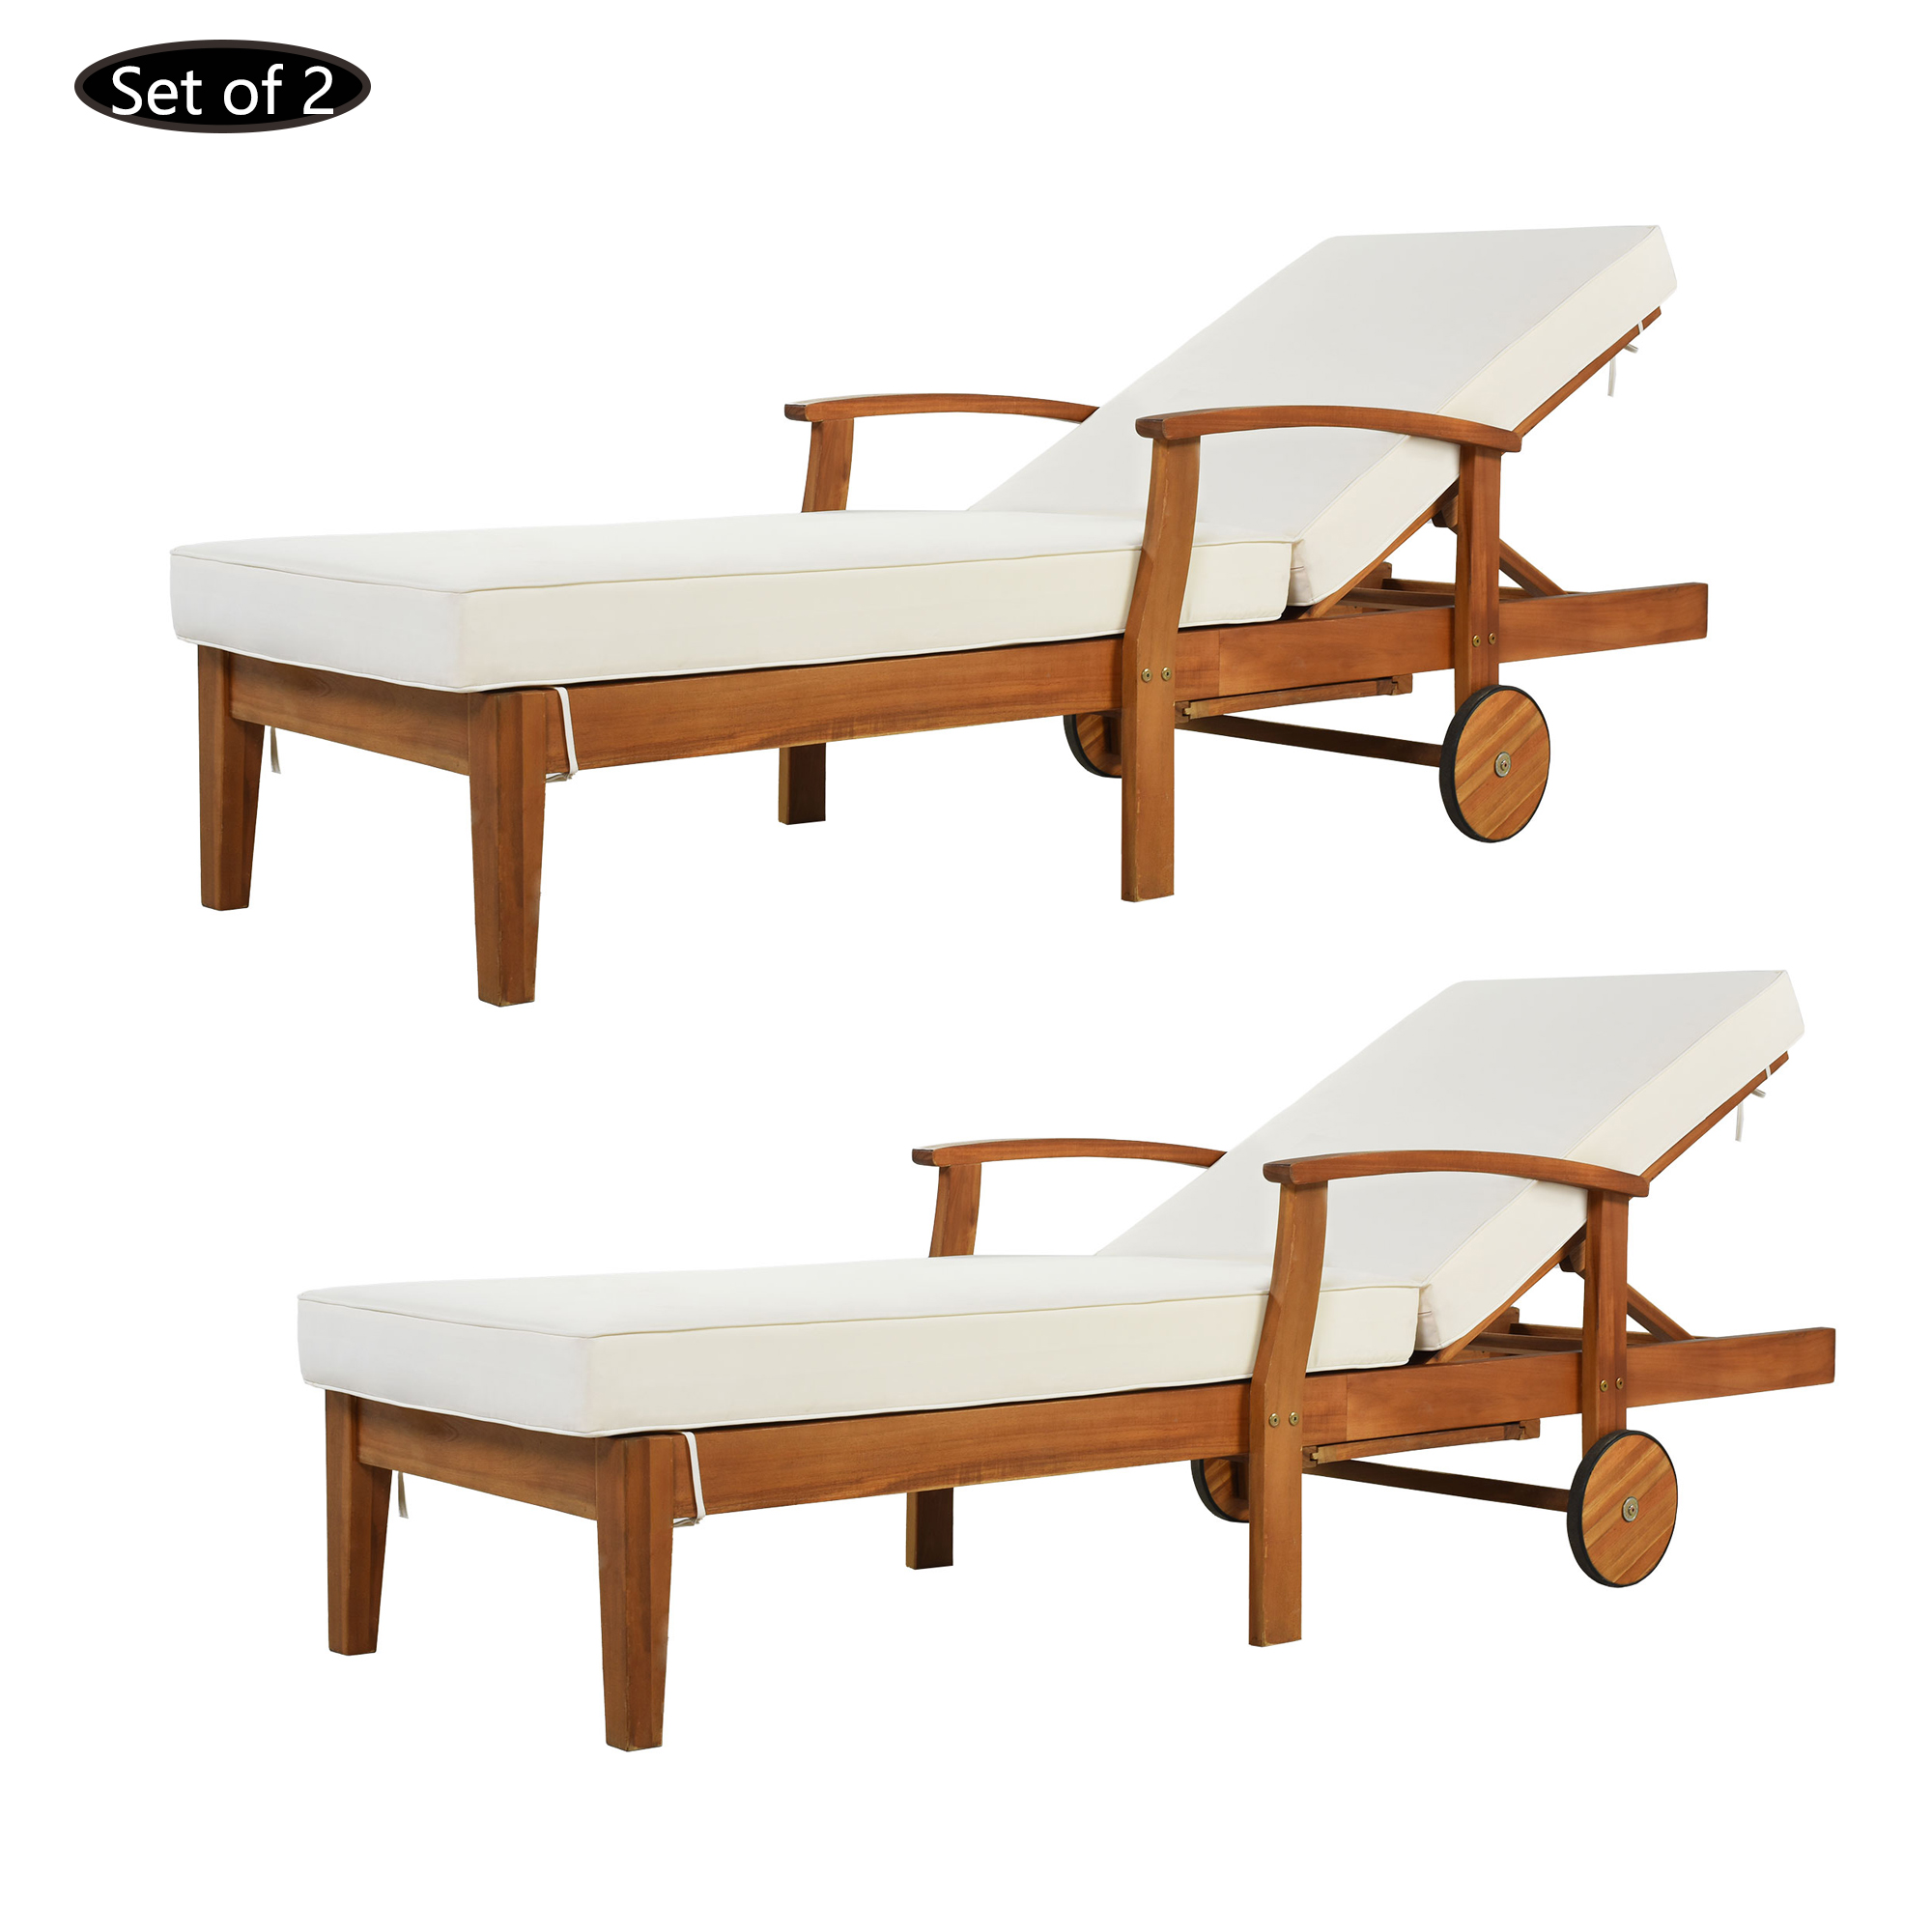 78.8" Chaise Lounge Patio Reclining Daybed - SH000203AAA